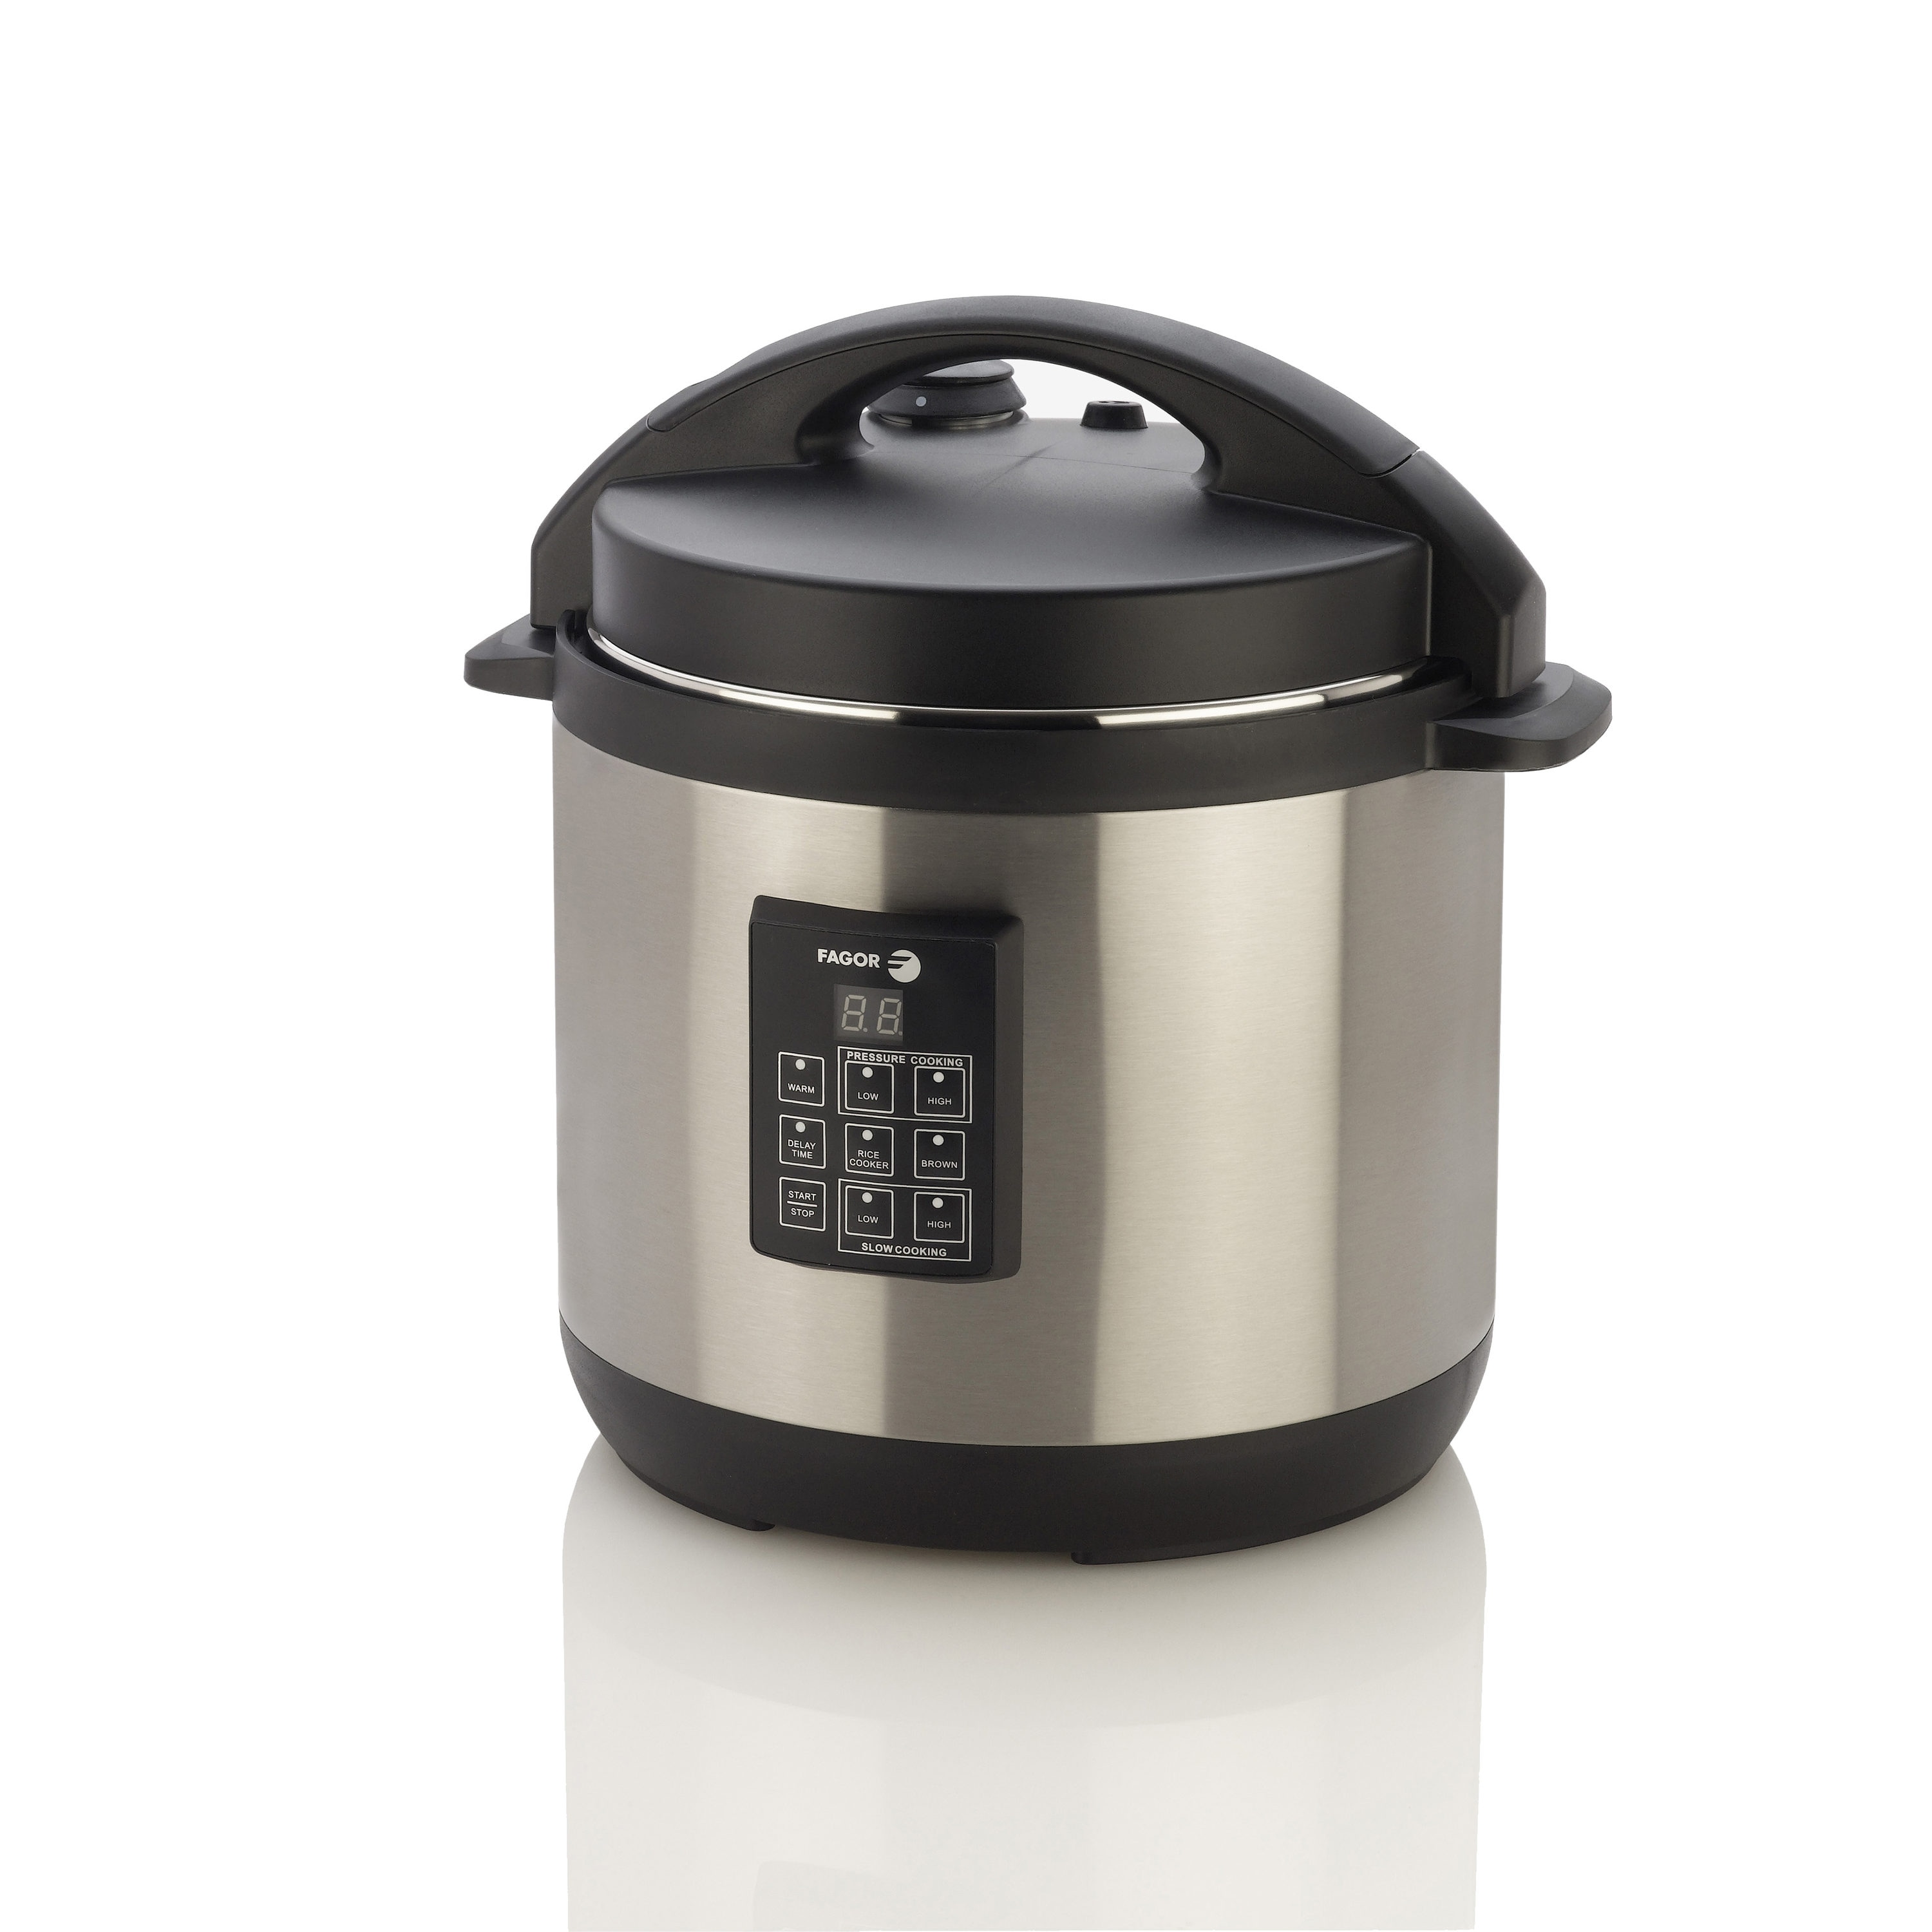 My First Date with the Fagor Chef Pressure Cooker - The Veggie Queen